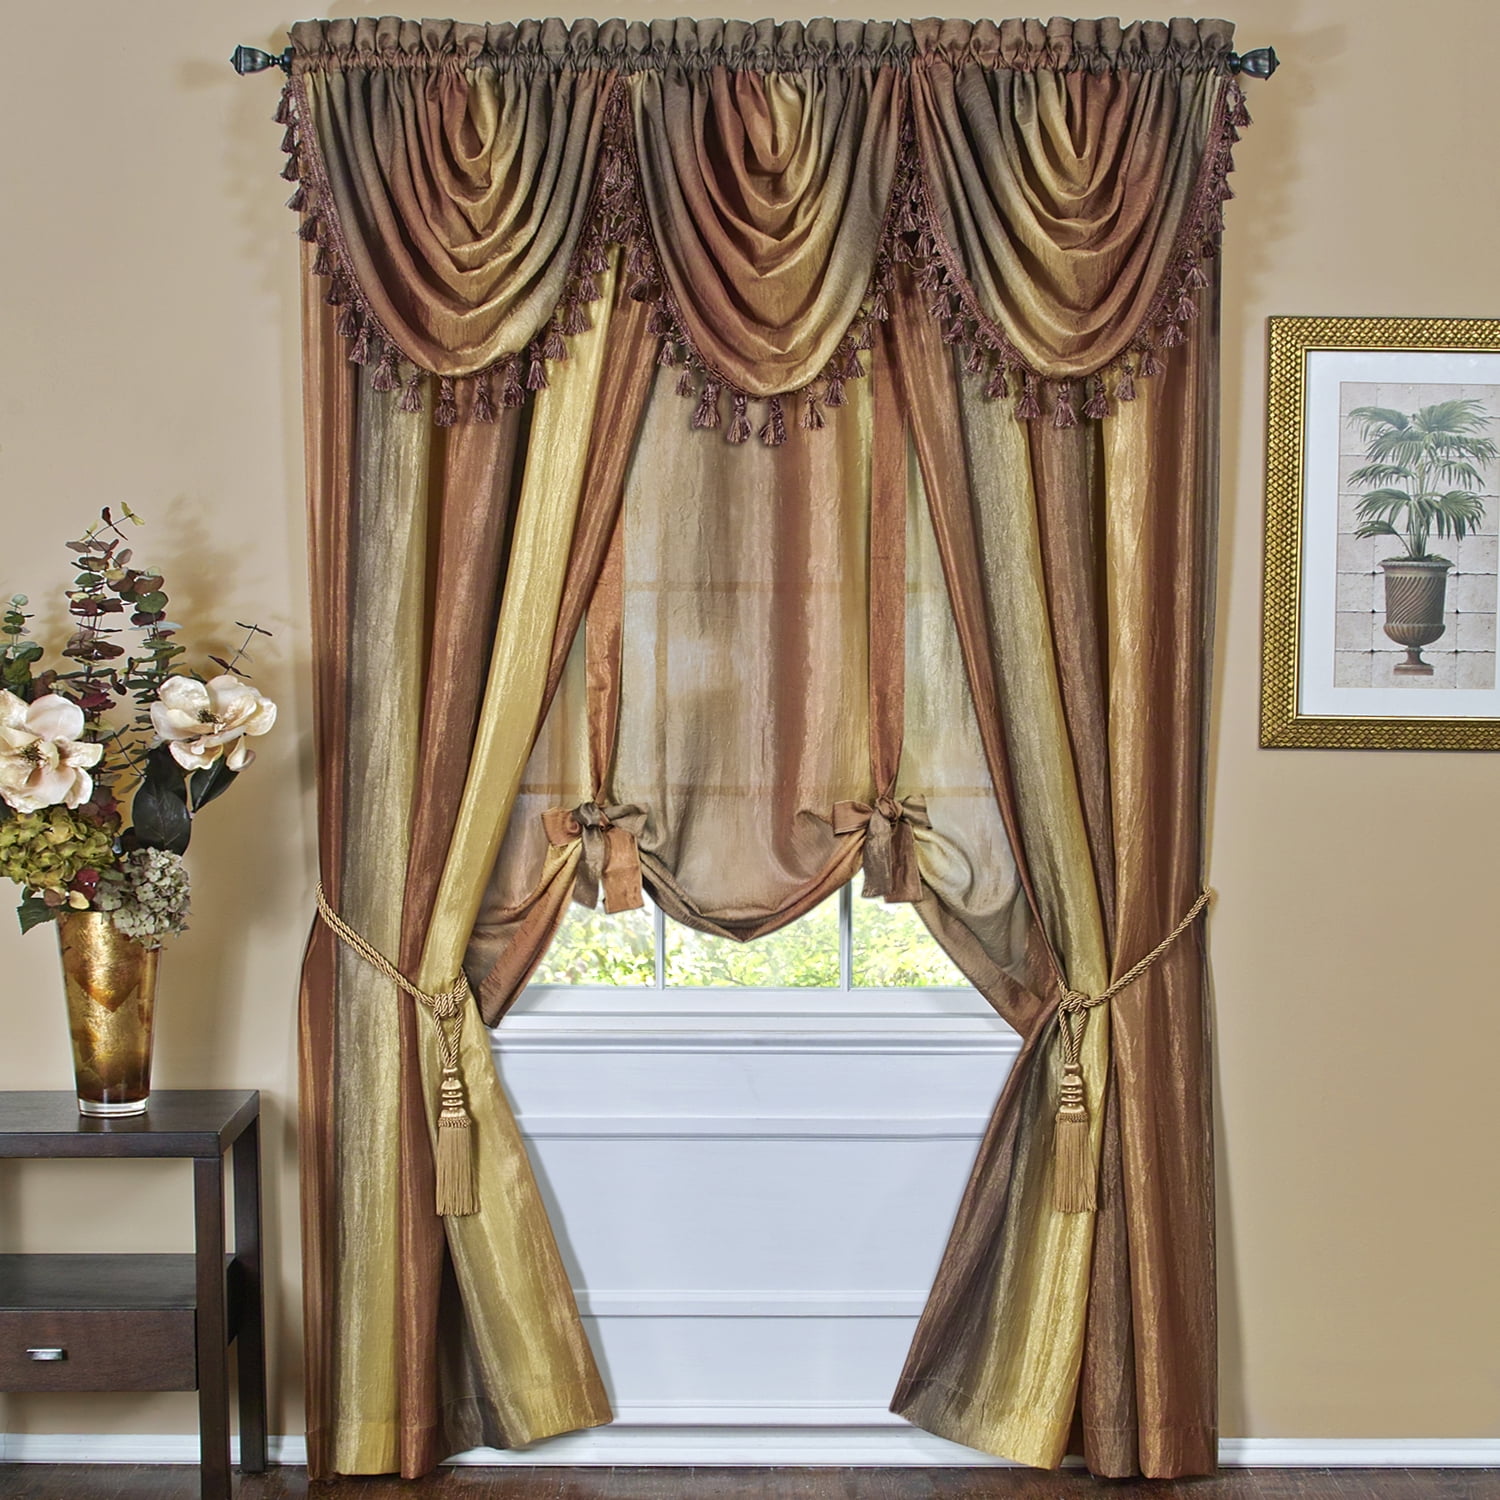 Achim Home Furnishings Curtains − Browse 30 Items now at $10.59+